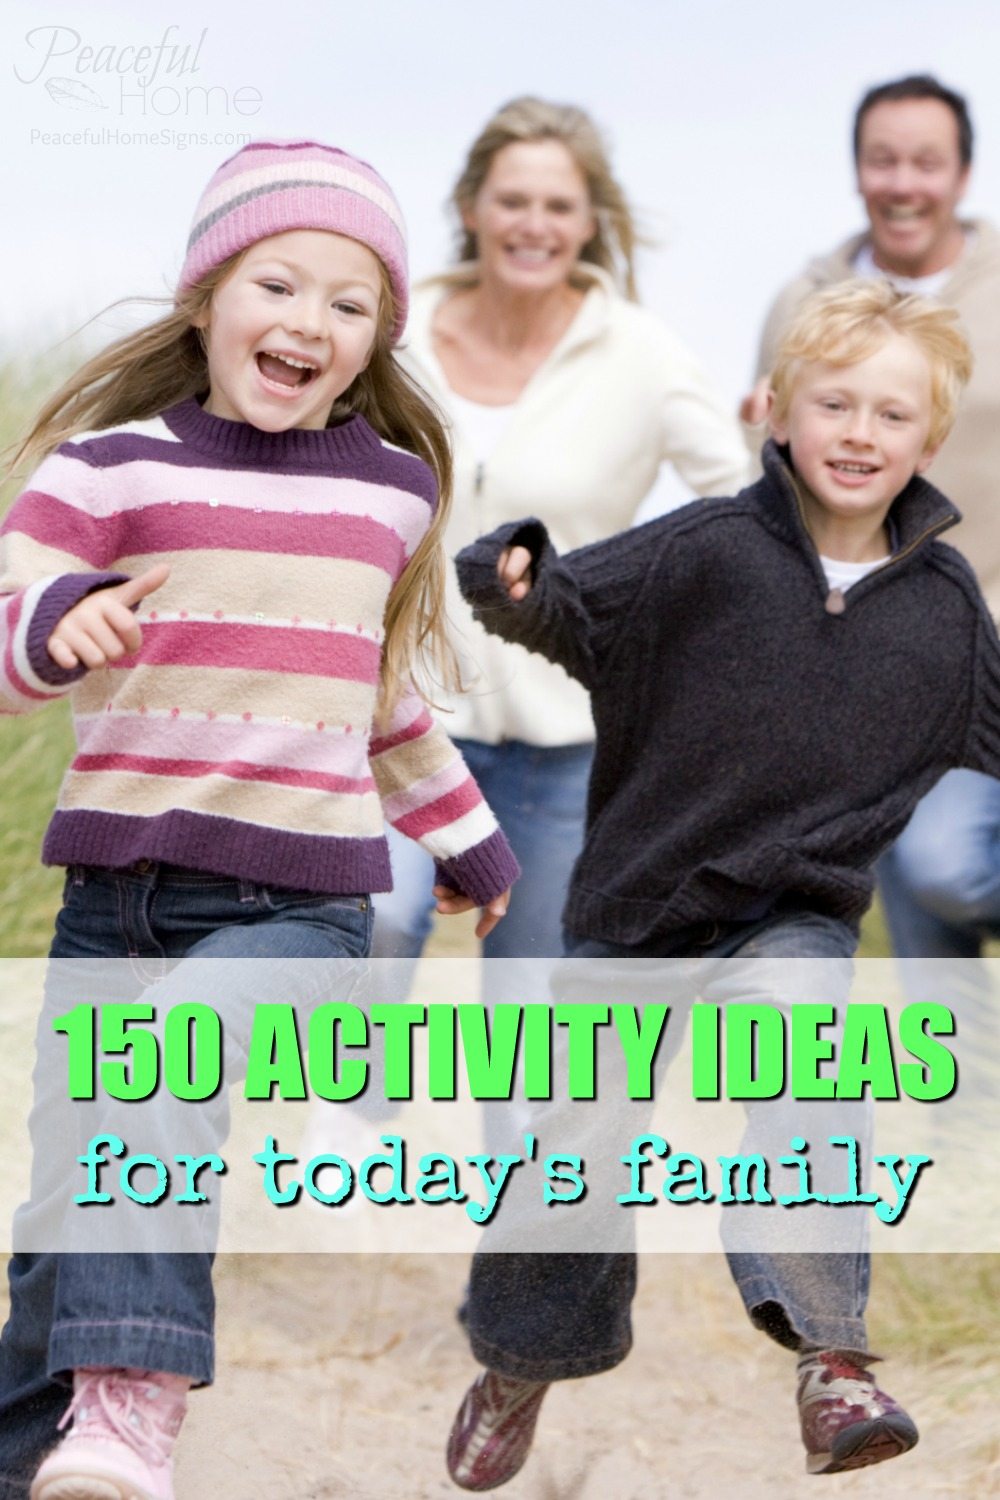 150 Activity Ideas for Today's Family | Screen Free Activities | Family Activities | Play as family | Stuff to Do With Kids | Weekend Activities | What to do with kids | Activities Outside | Teach kids about giving and serving